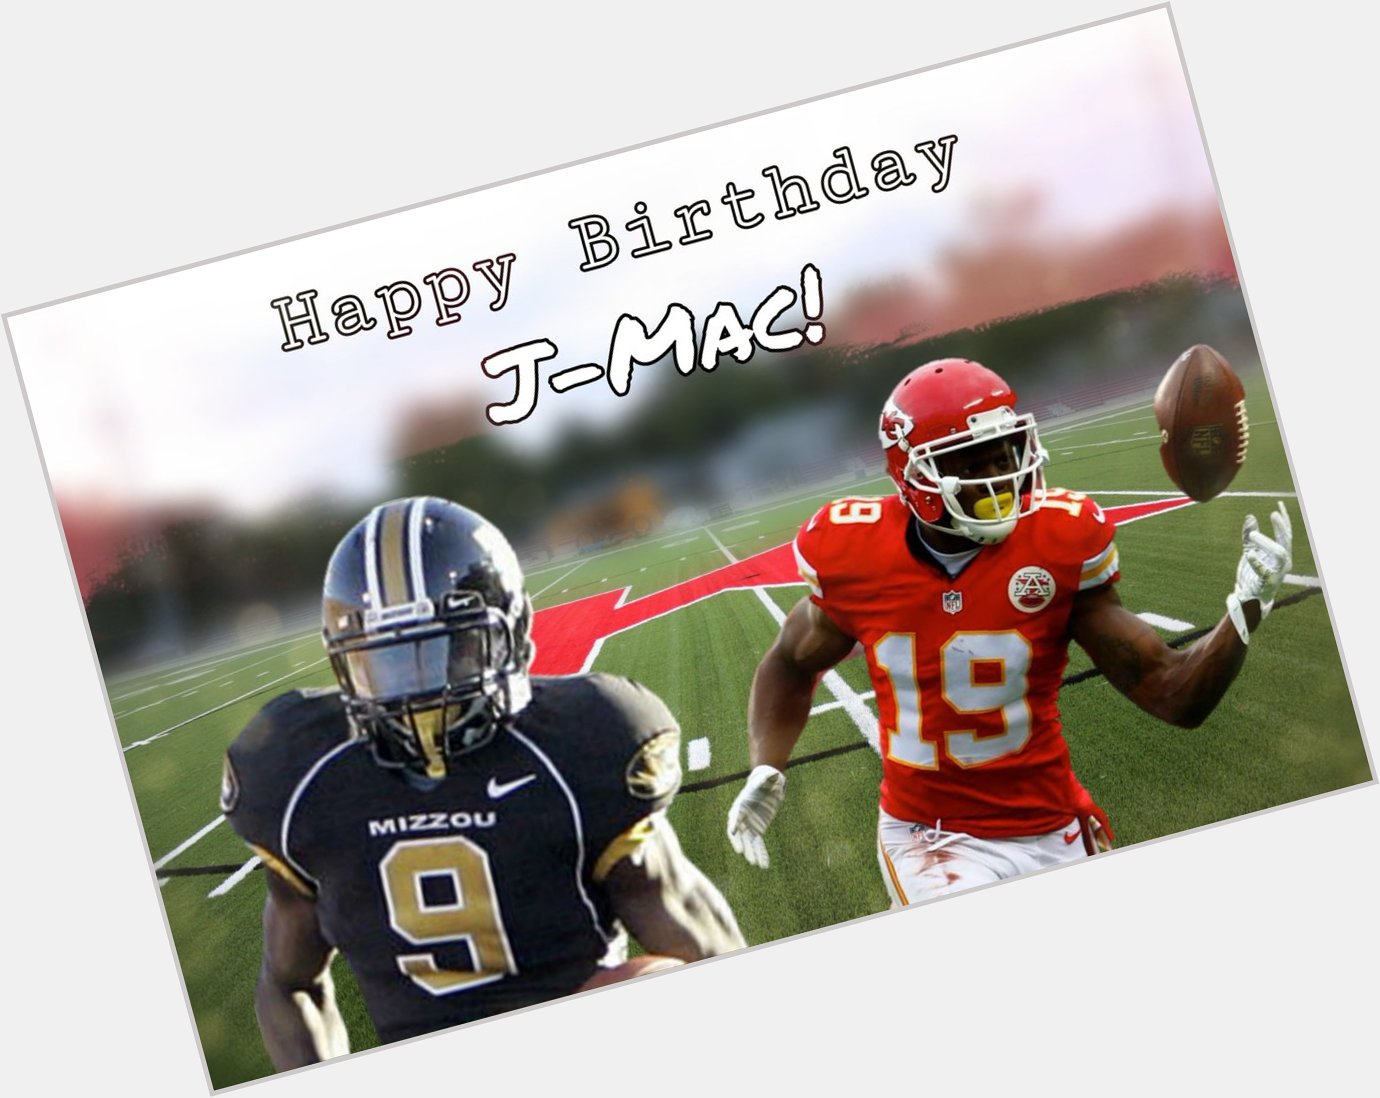 Wanted to wish a VERY Happy Birthday to everyone\s favorite football player, Jeremy Maclin! 